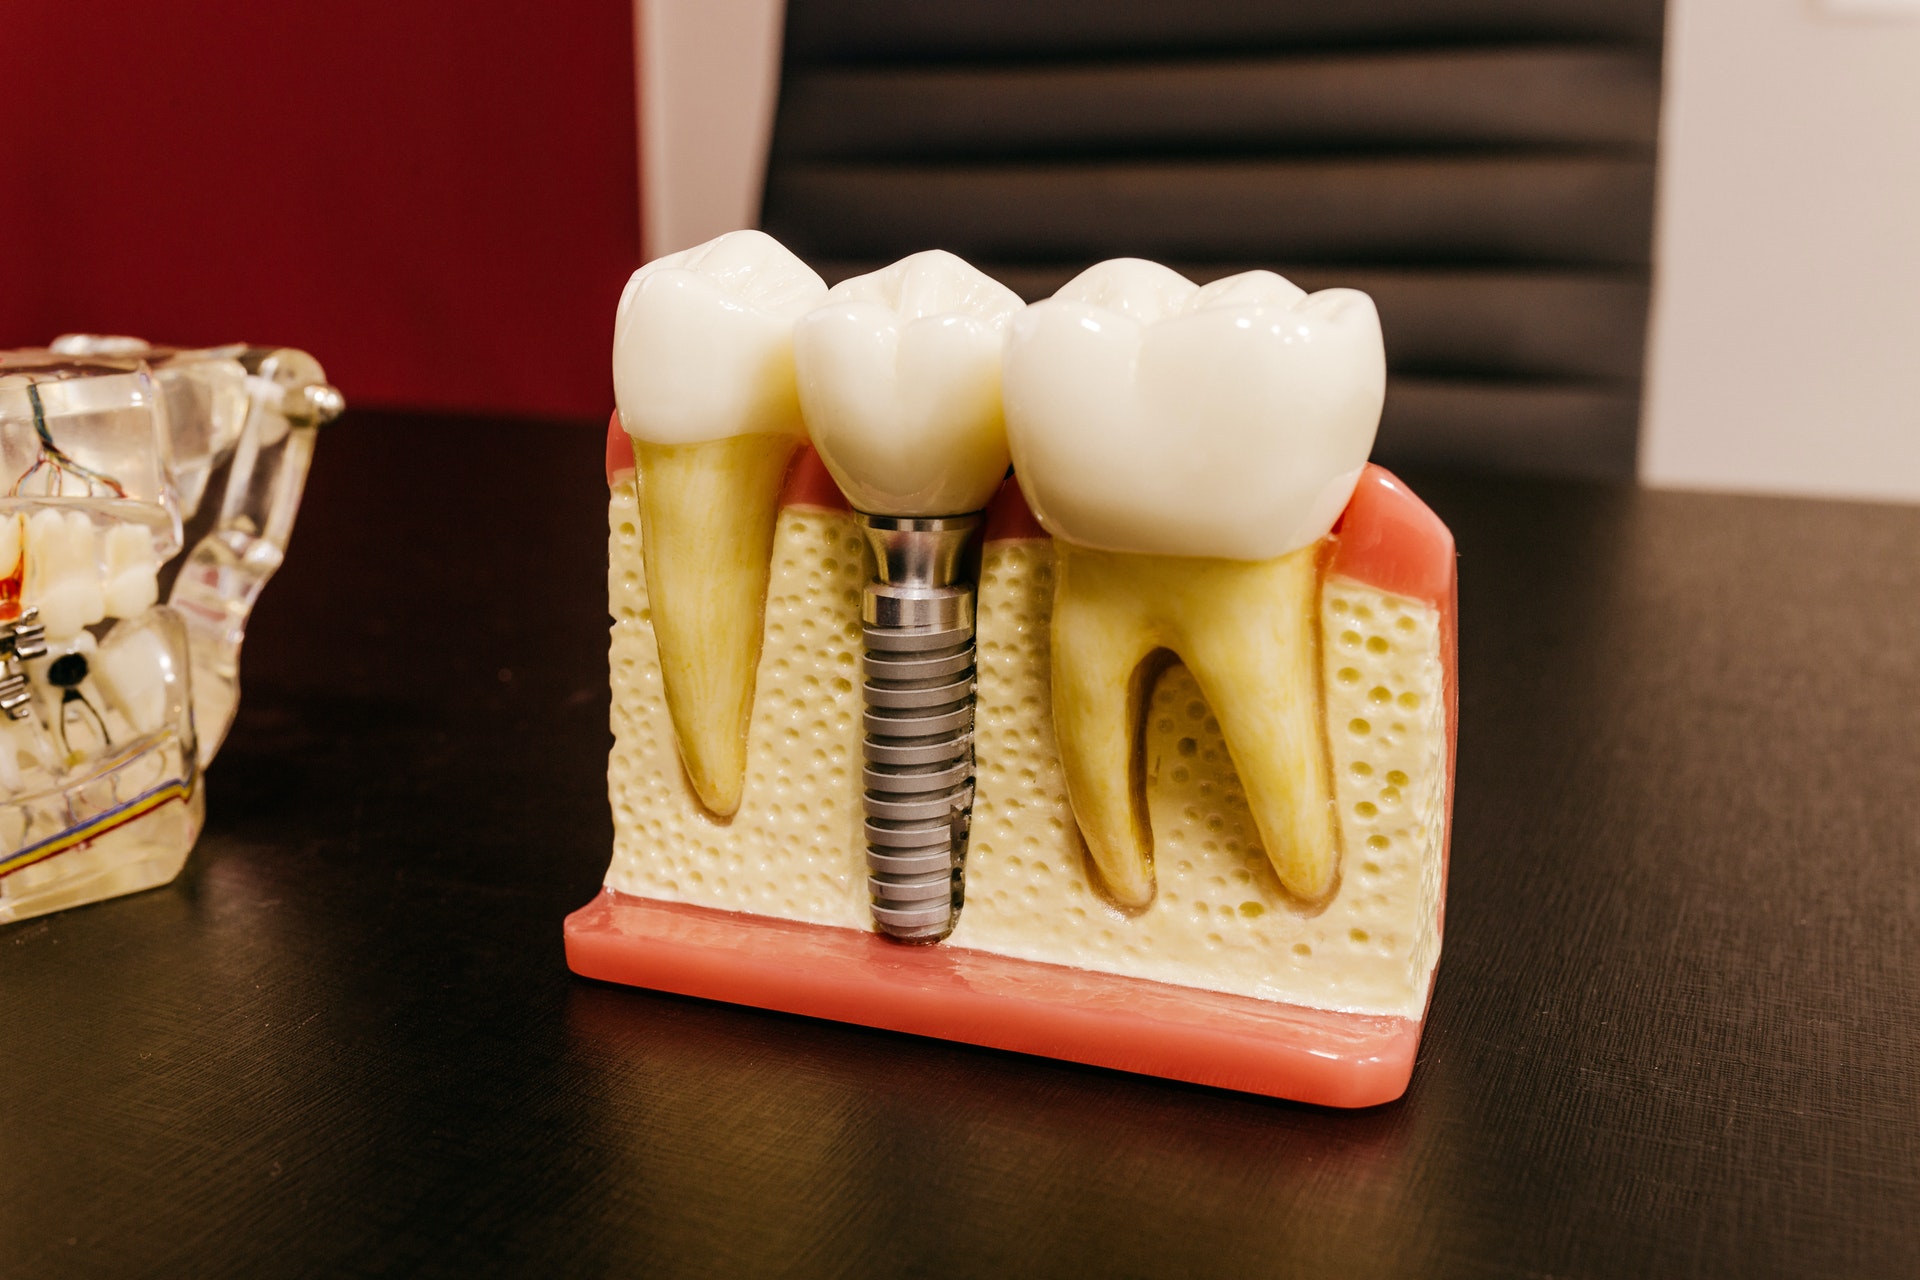 Model of a dental implant on a table in a clinic